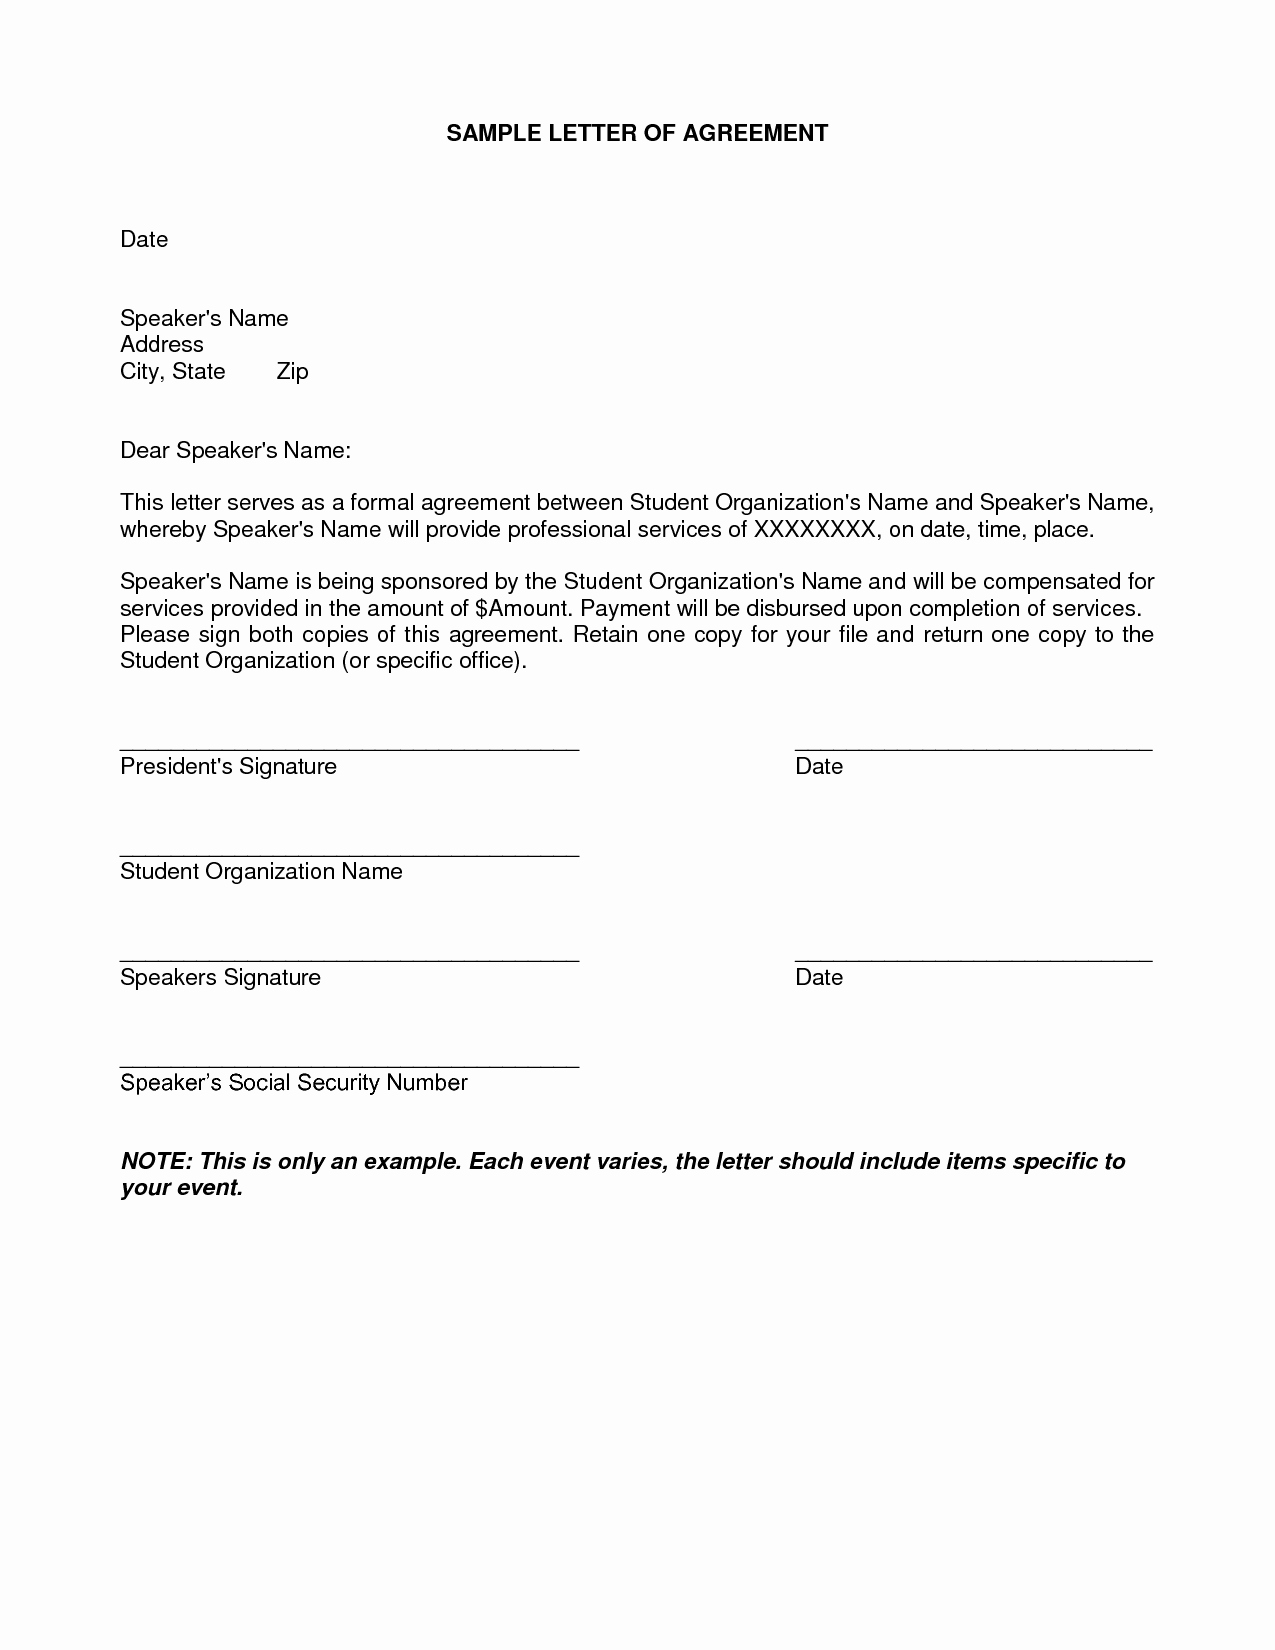 Advance Payment Agreement Letter Beautiful Letter Agreement Samples Template Seeabruzzo Letter